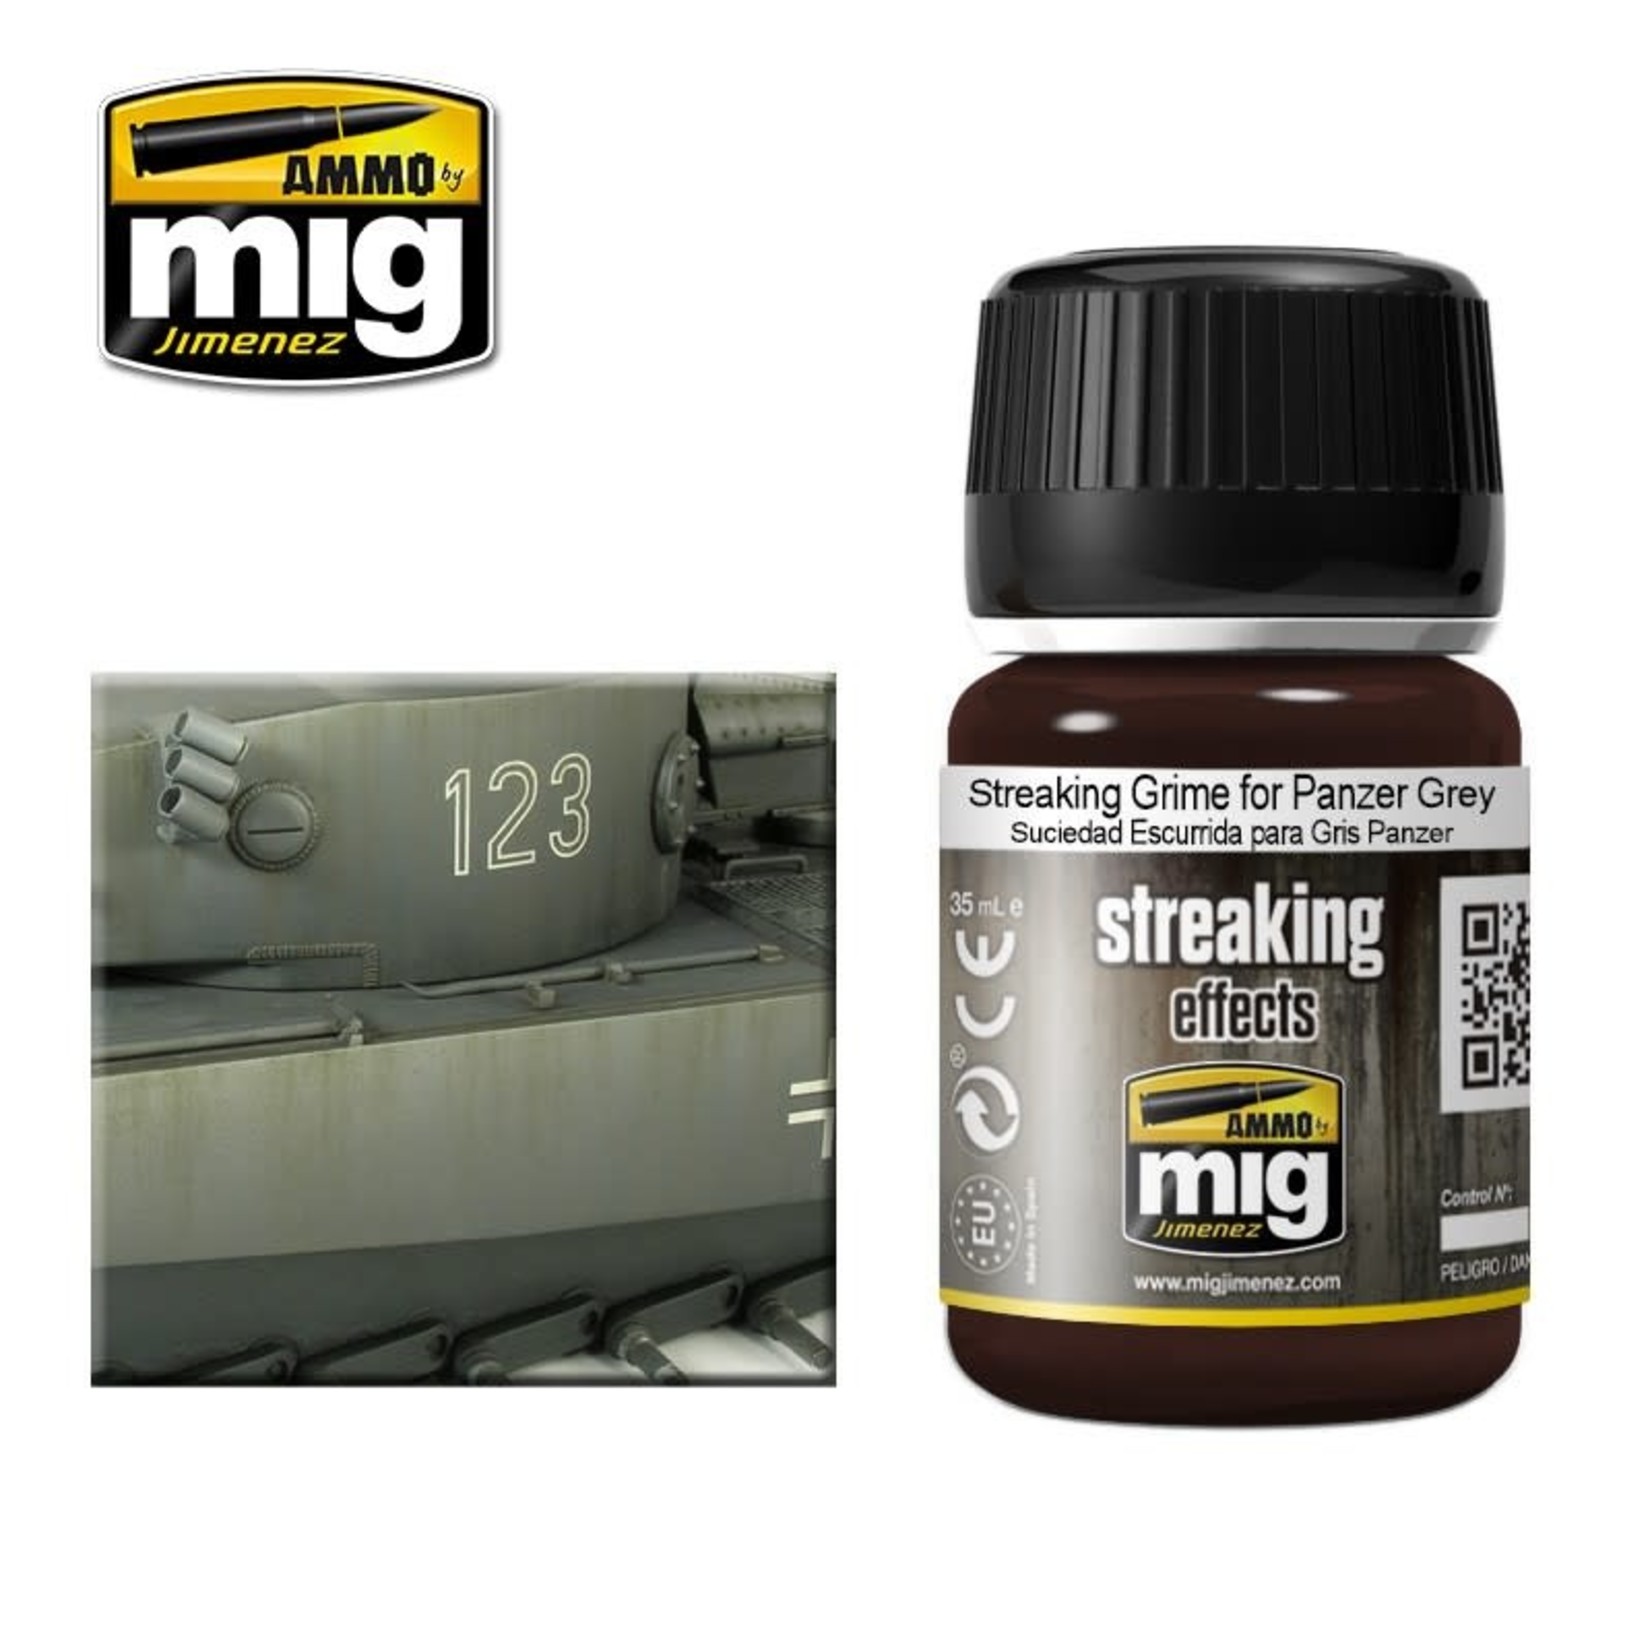 Ammo by Mig Jimenez A.MIG-1202 Streaking Effects - Streaking Grime for Panzer Grey 35ML